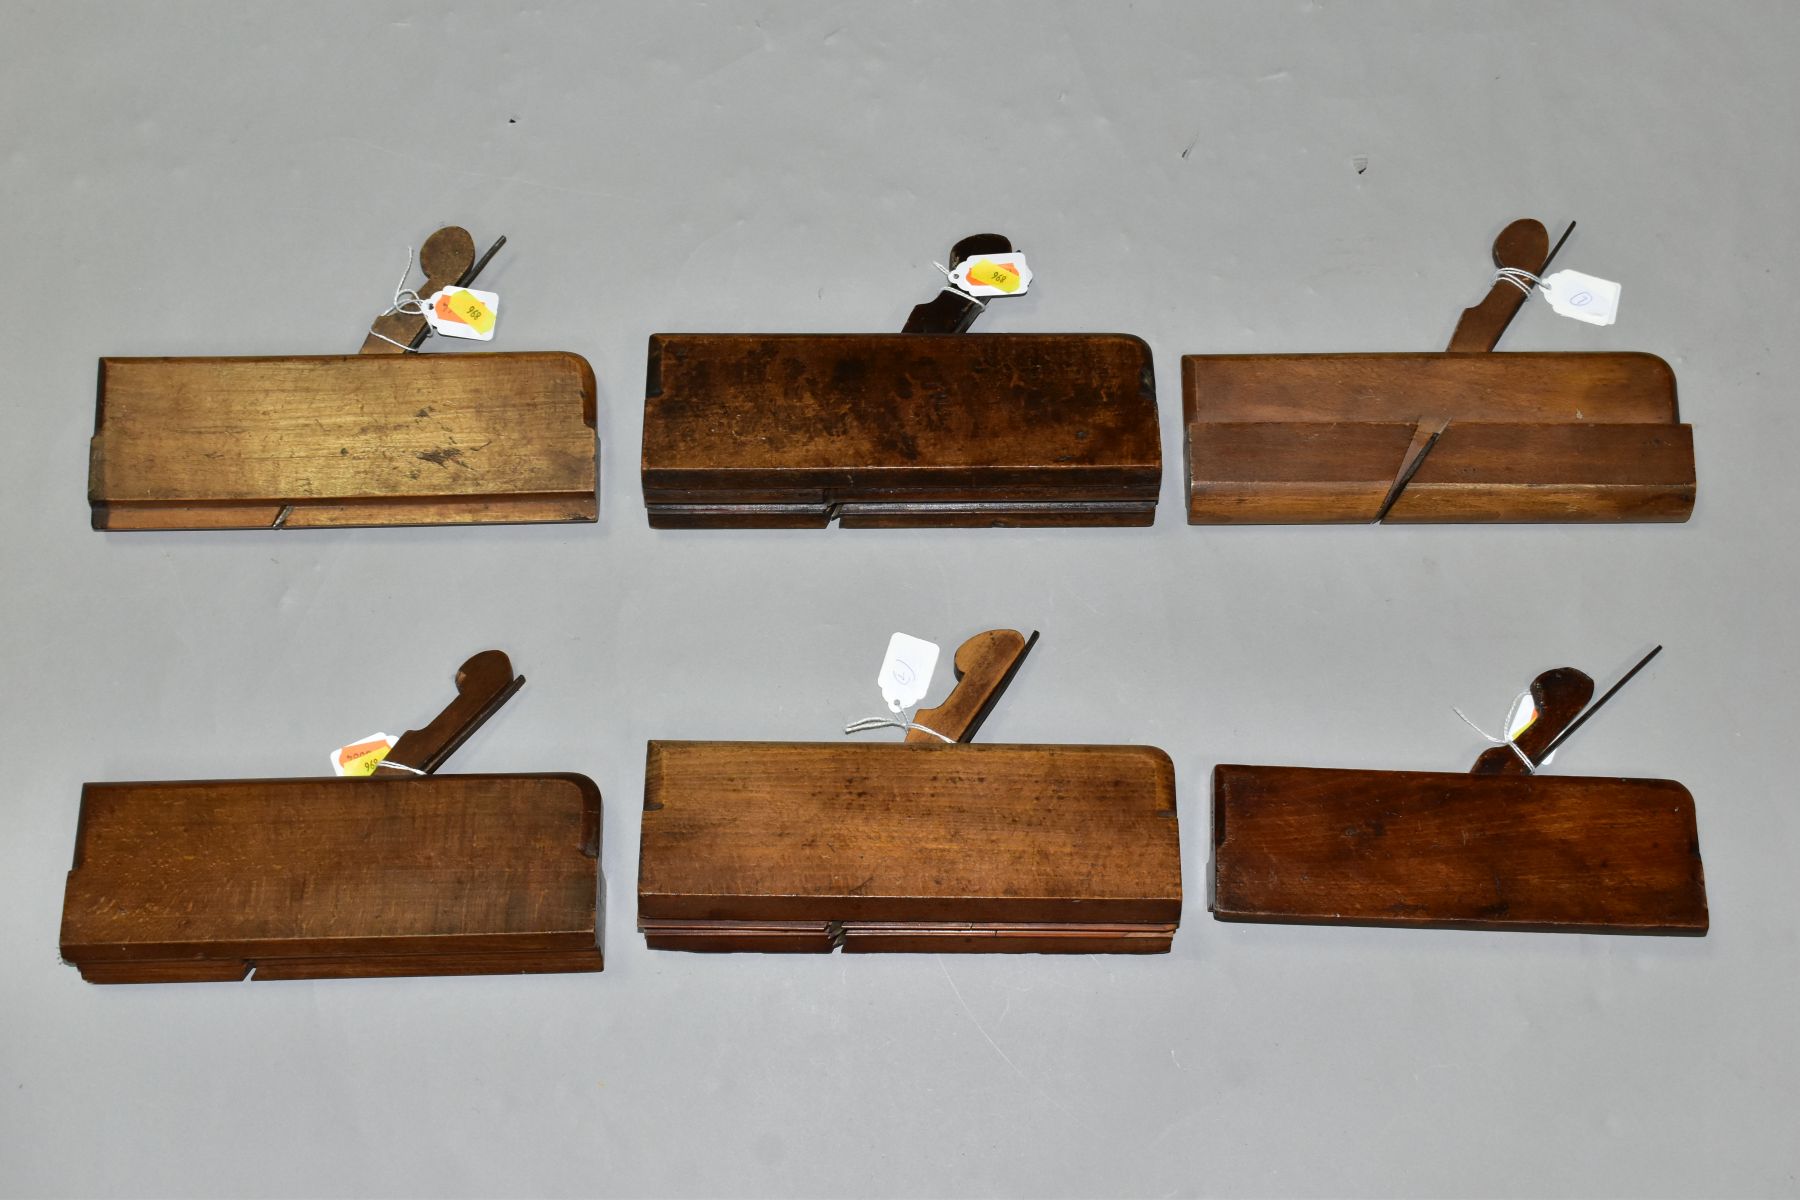 SIX GABRIEL MOULDING PLANES including a pair of Side Rounds, a Quirk Ovolo Bead, etc - Image 4 of 6